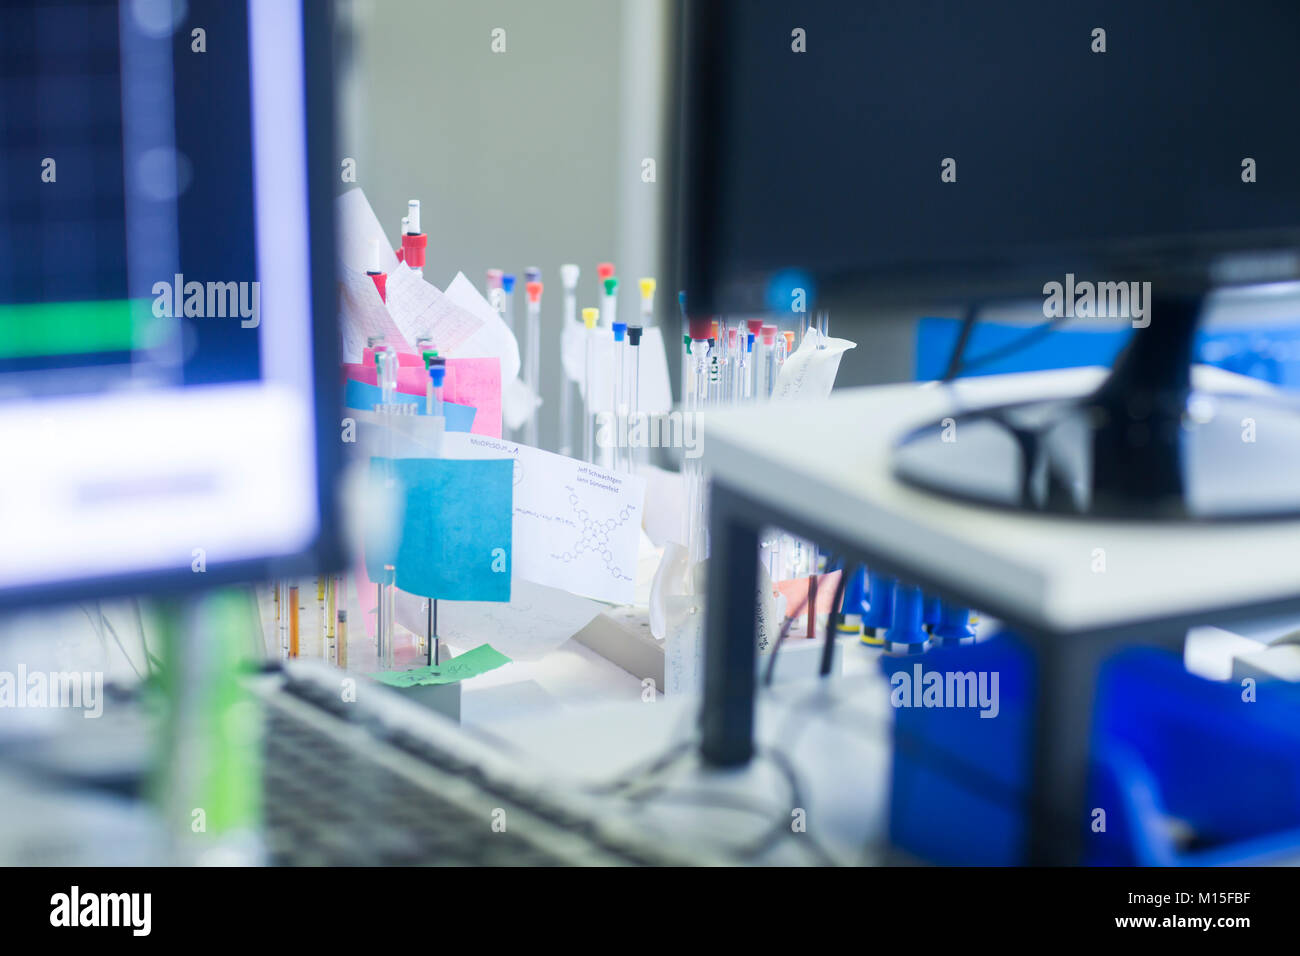 NMR (nuclear magnetic resonance) spectroscopy phials in a pharmaceutical laboratory. Stock Photo